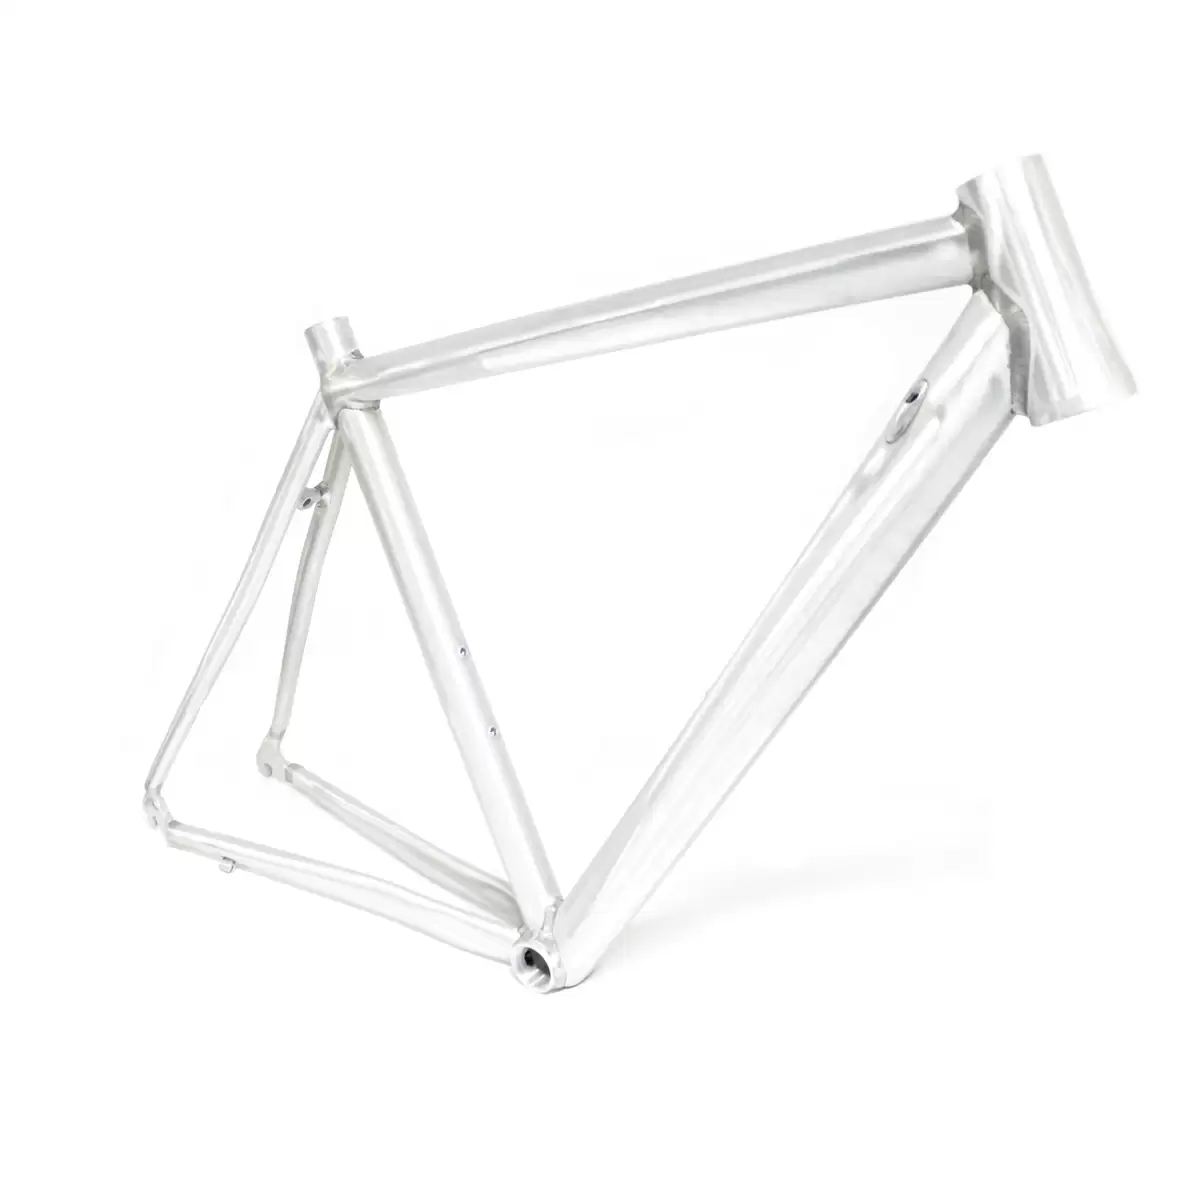 Road alloy tapered Caliper Frame size 55 - image